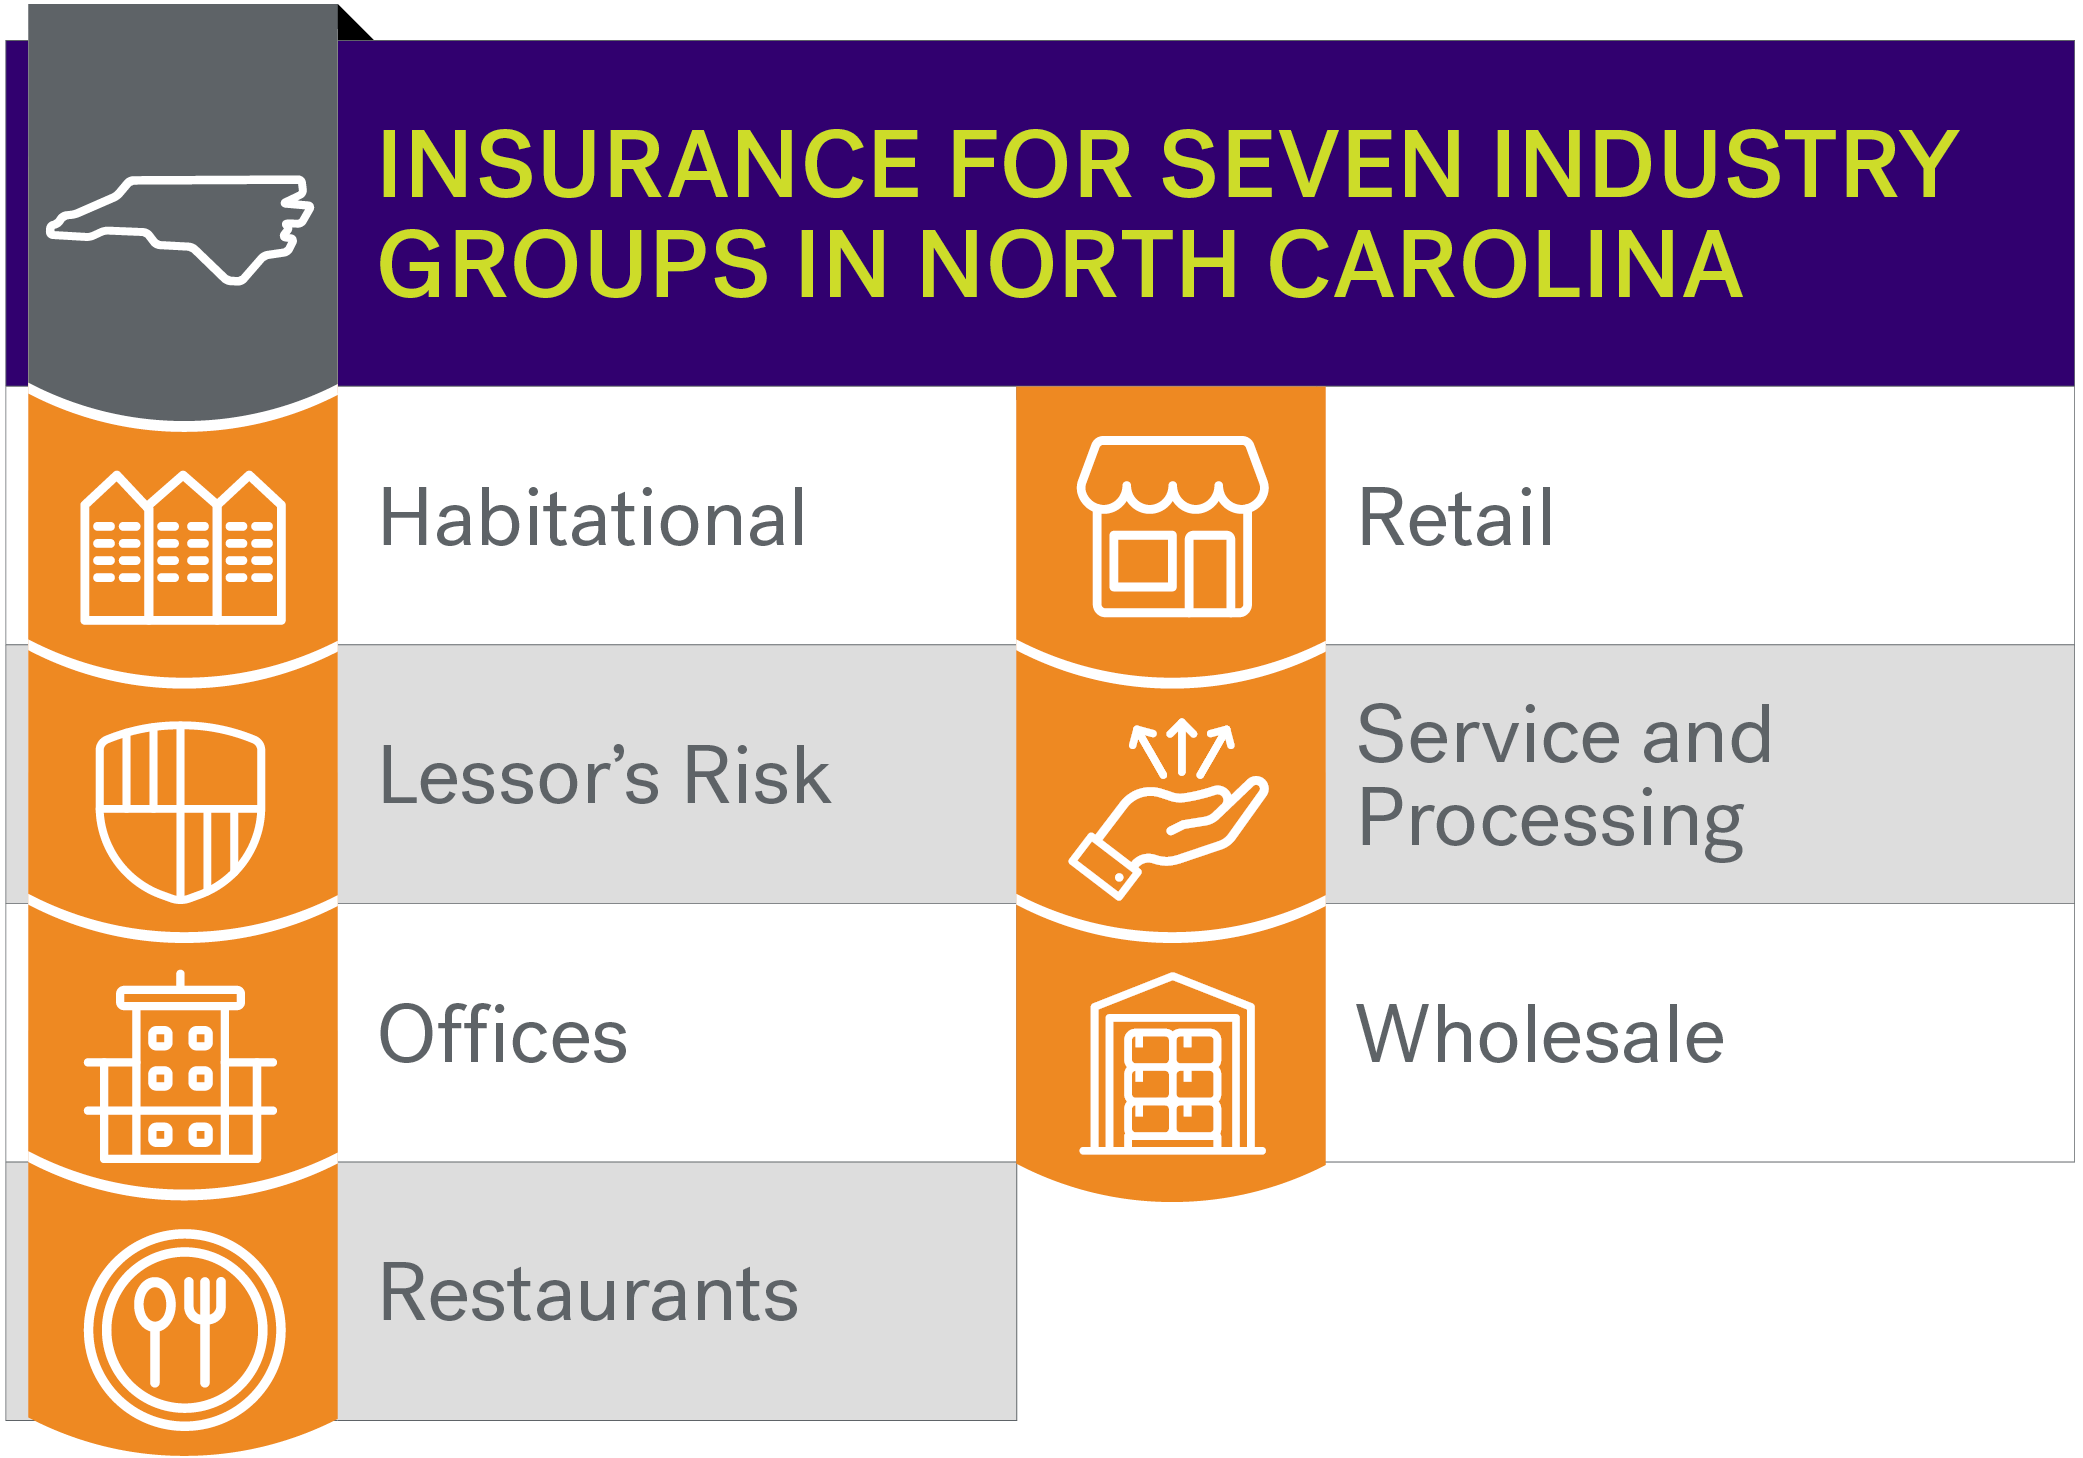 Insurance industry groups